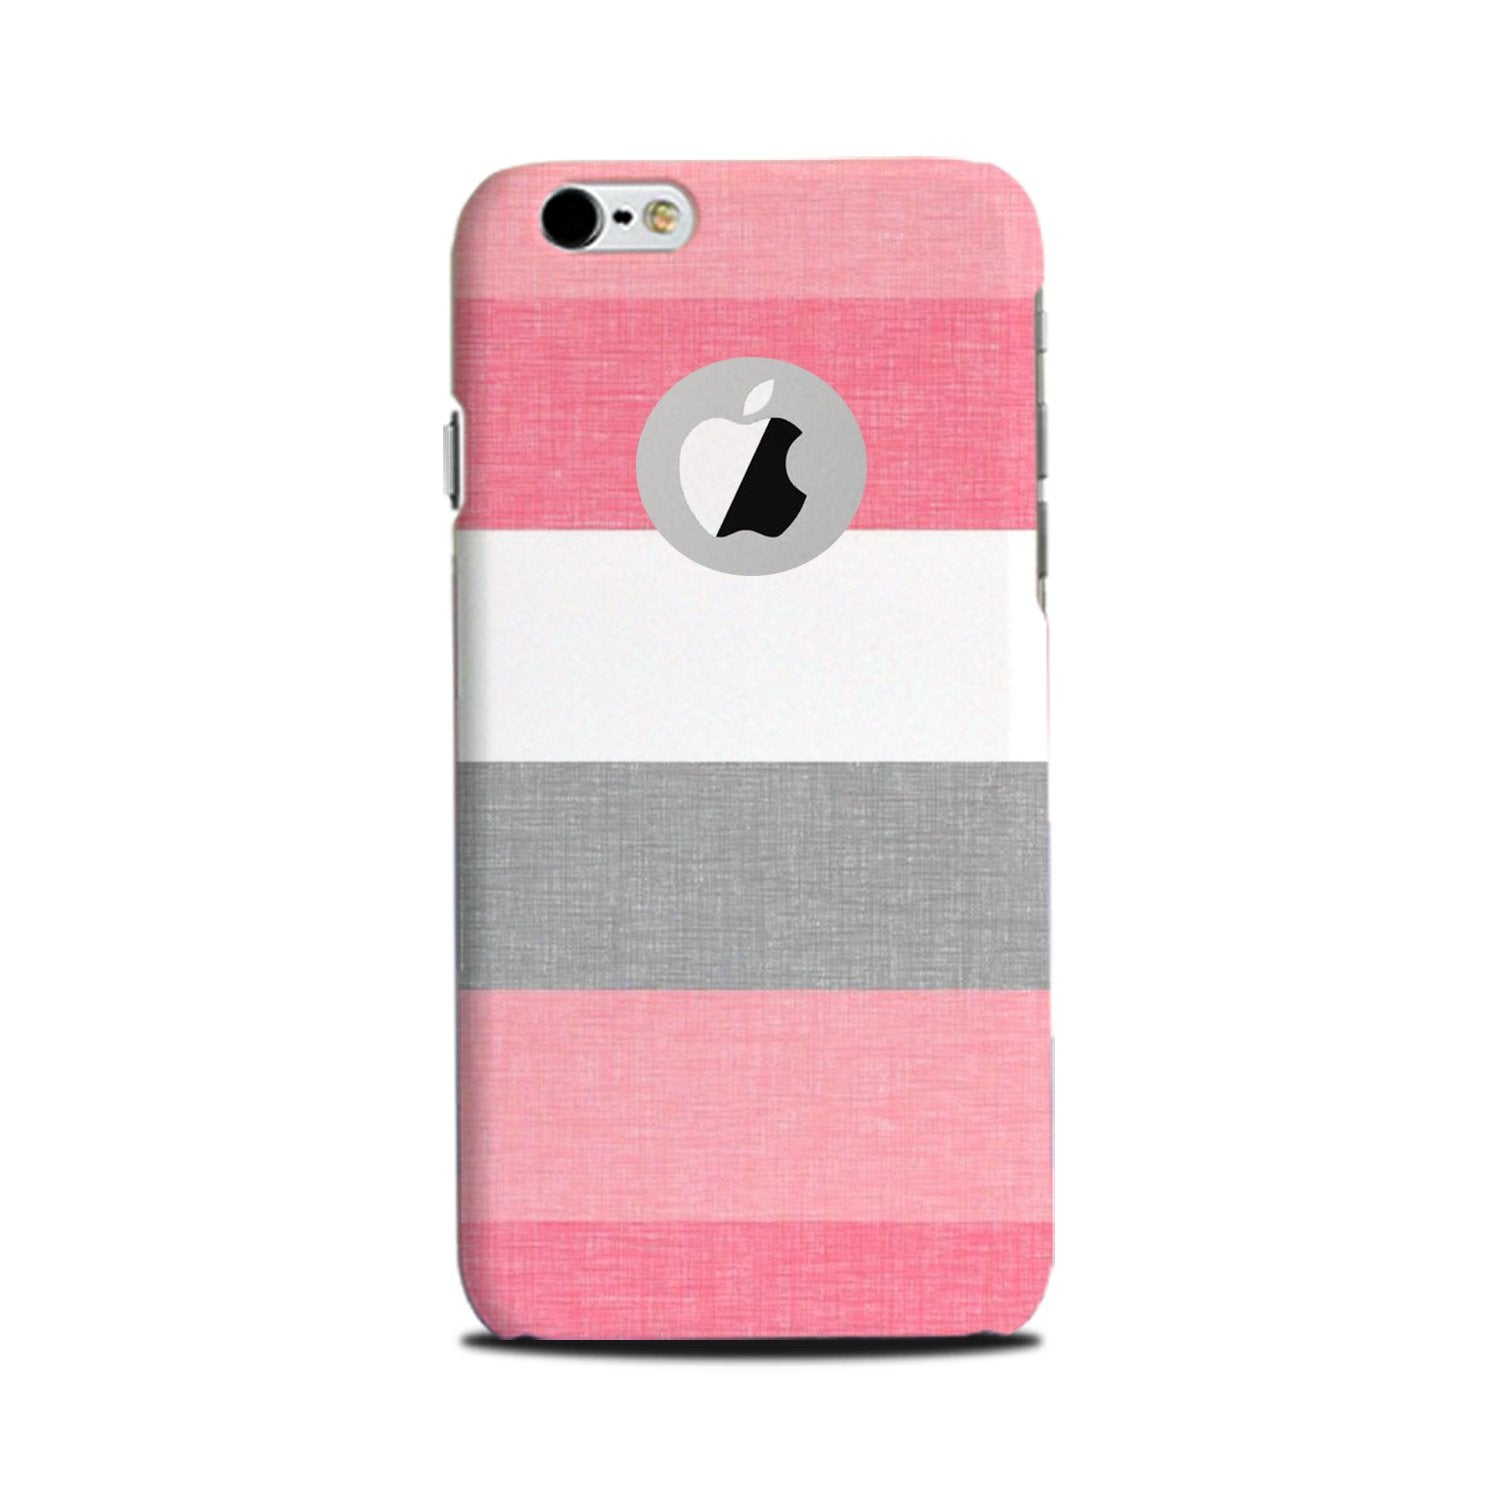 Pink white pattern Case for iPhone 6 Plus / 6s Plus logo cut 